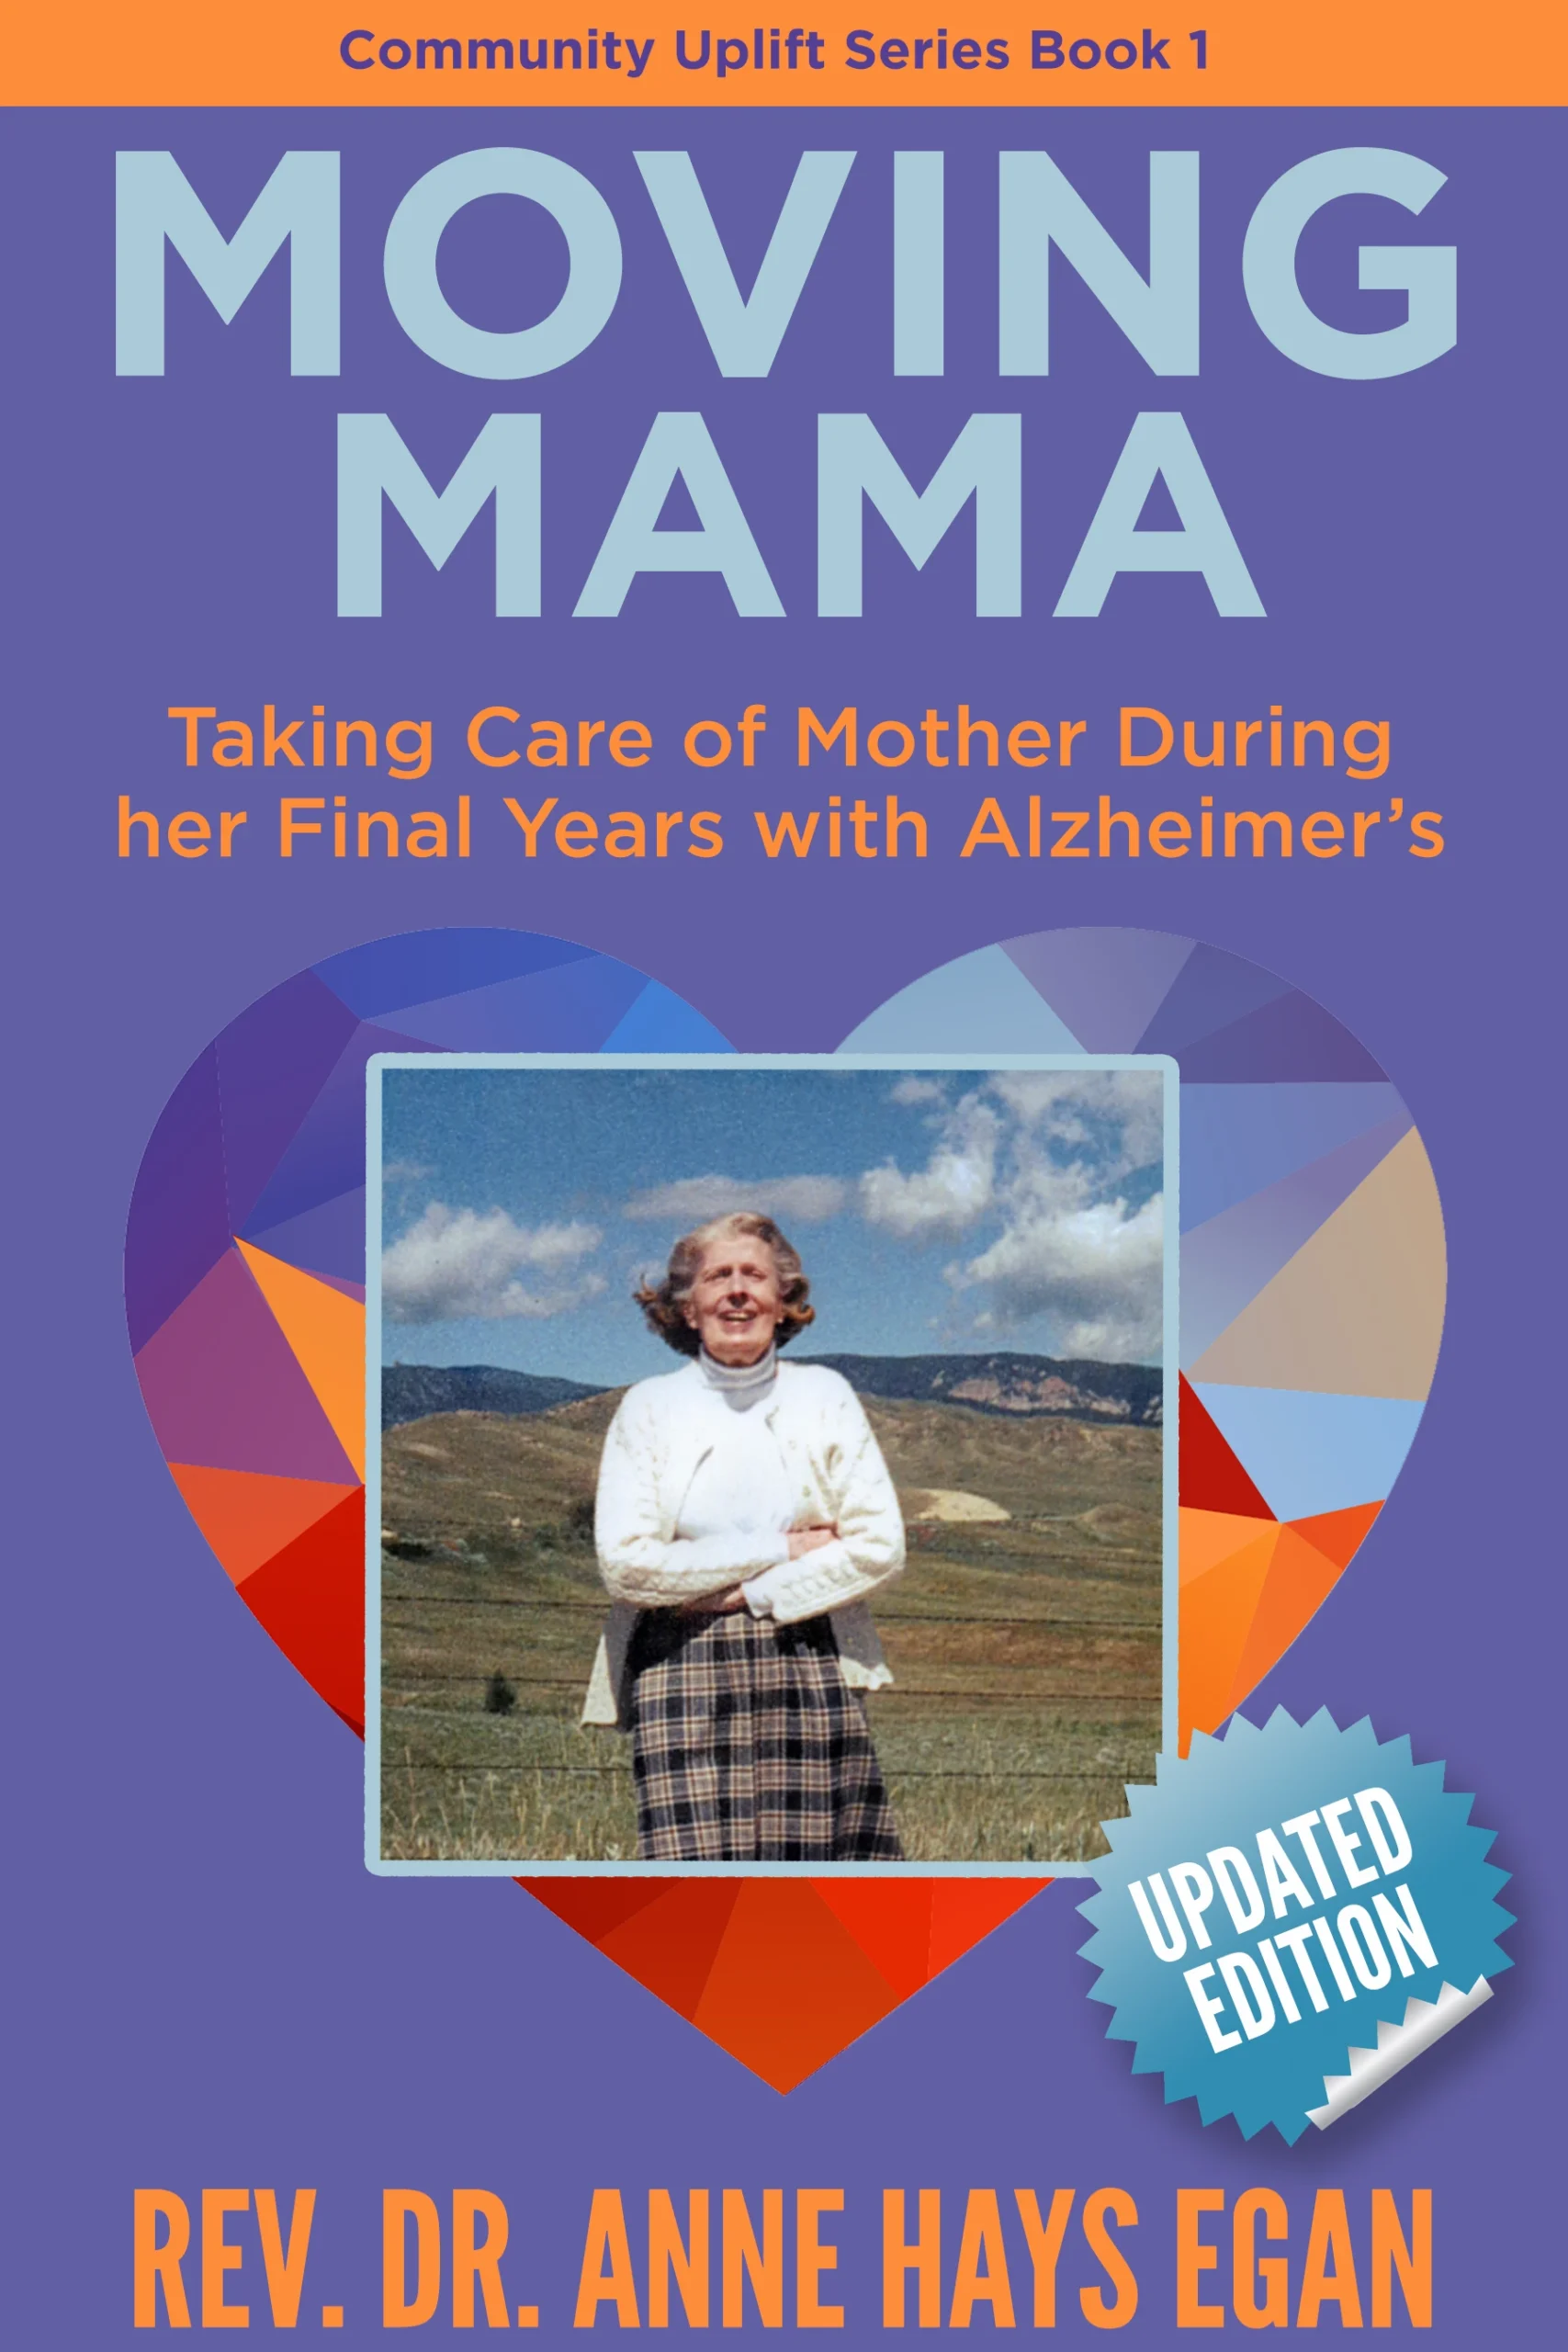 Moving Mama: Taking Care of Mother During Her Final Years with Alzheimer’s